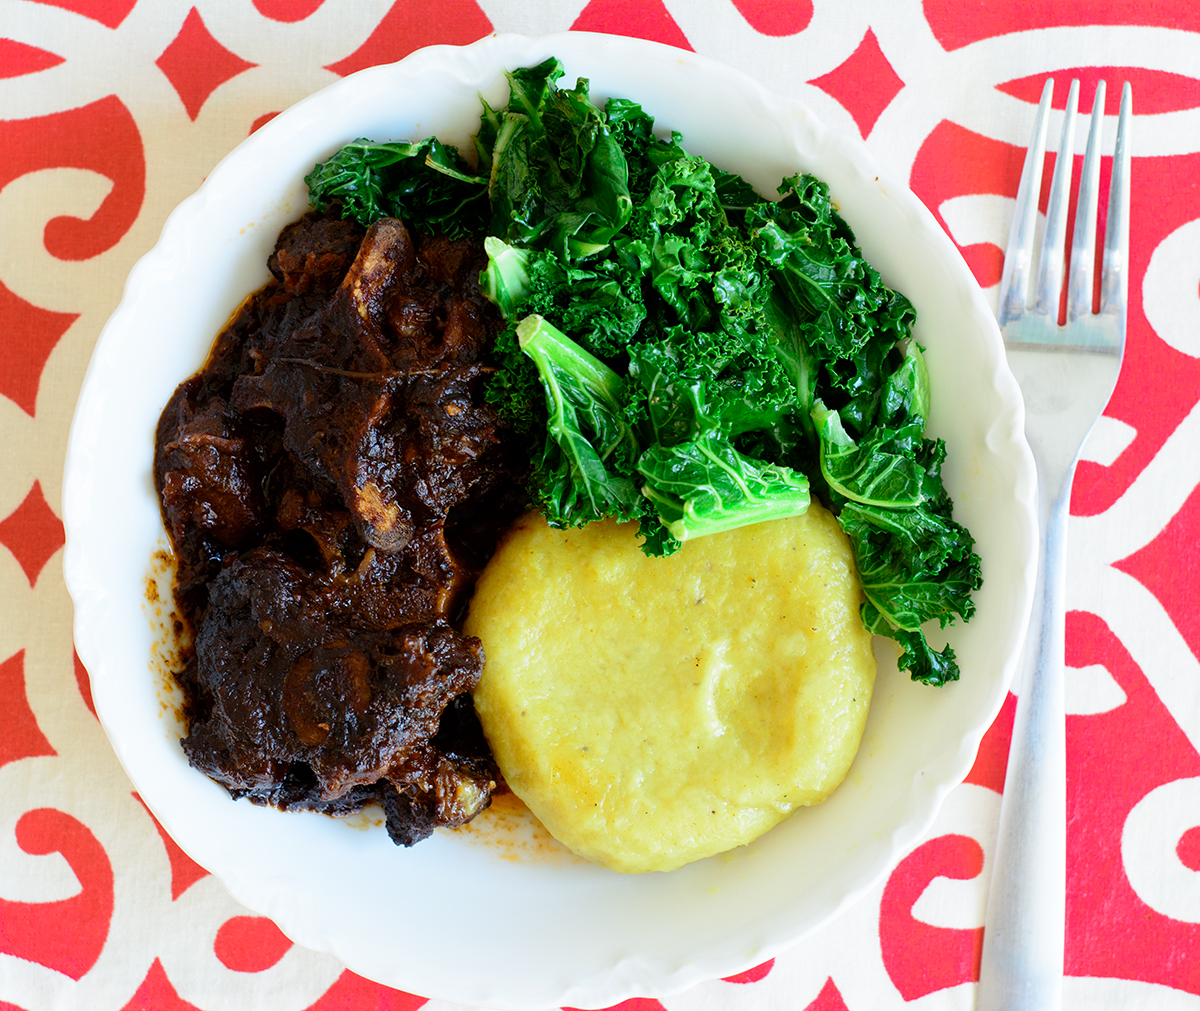 Ackee-boiled-dumpling-with-oxtail-and-kale